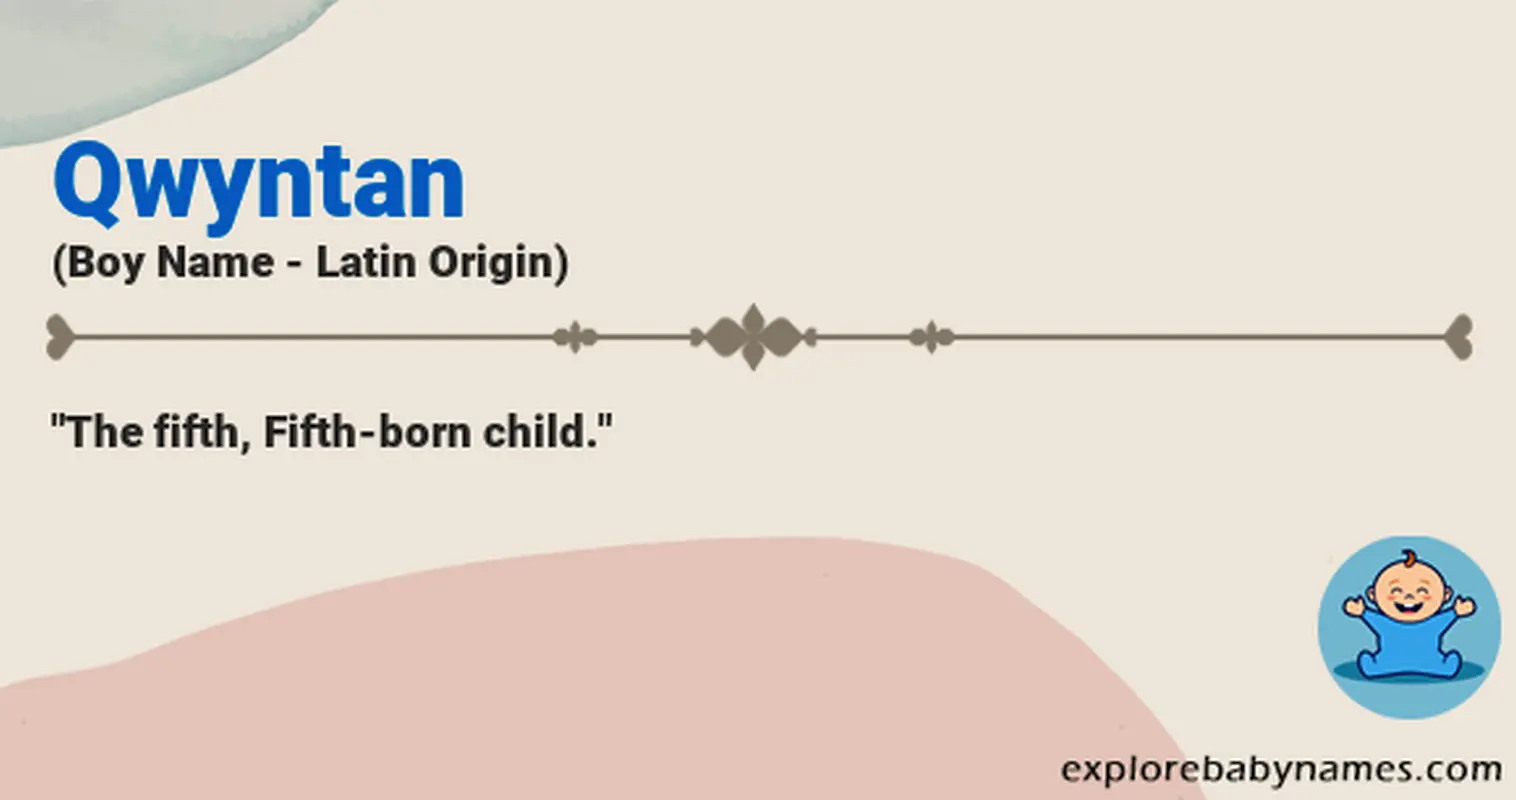 Meaning of Qwyntan